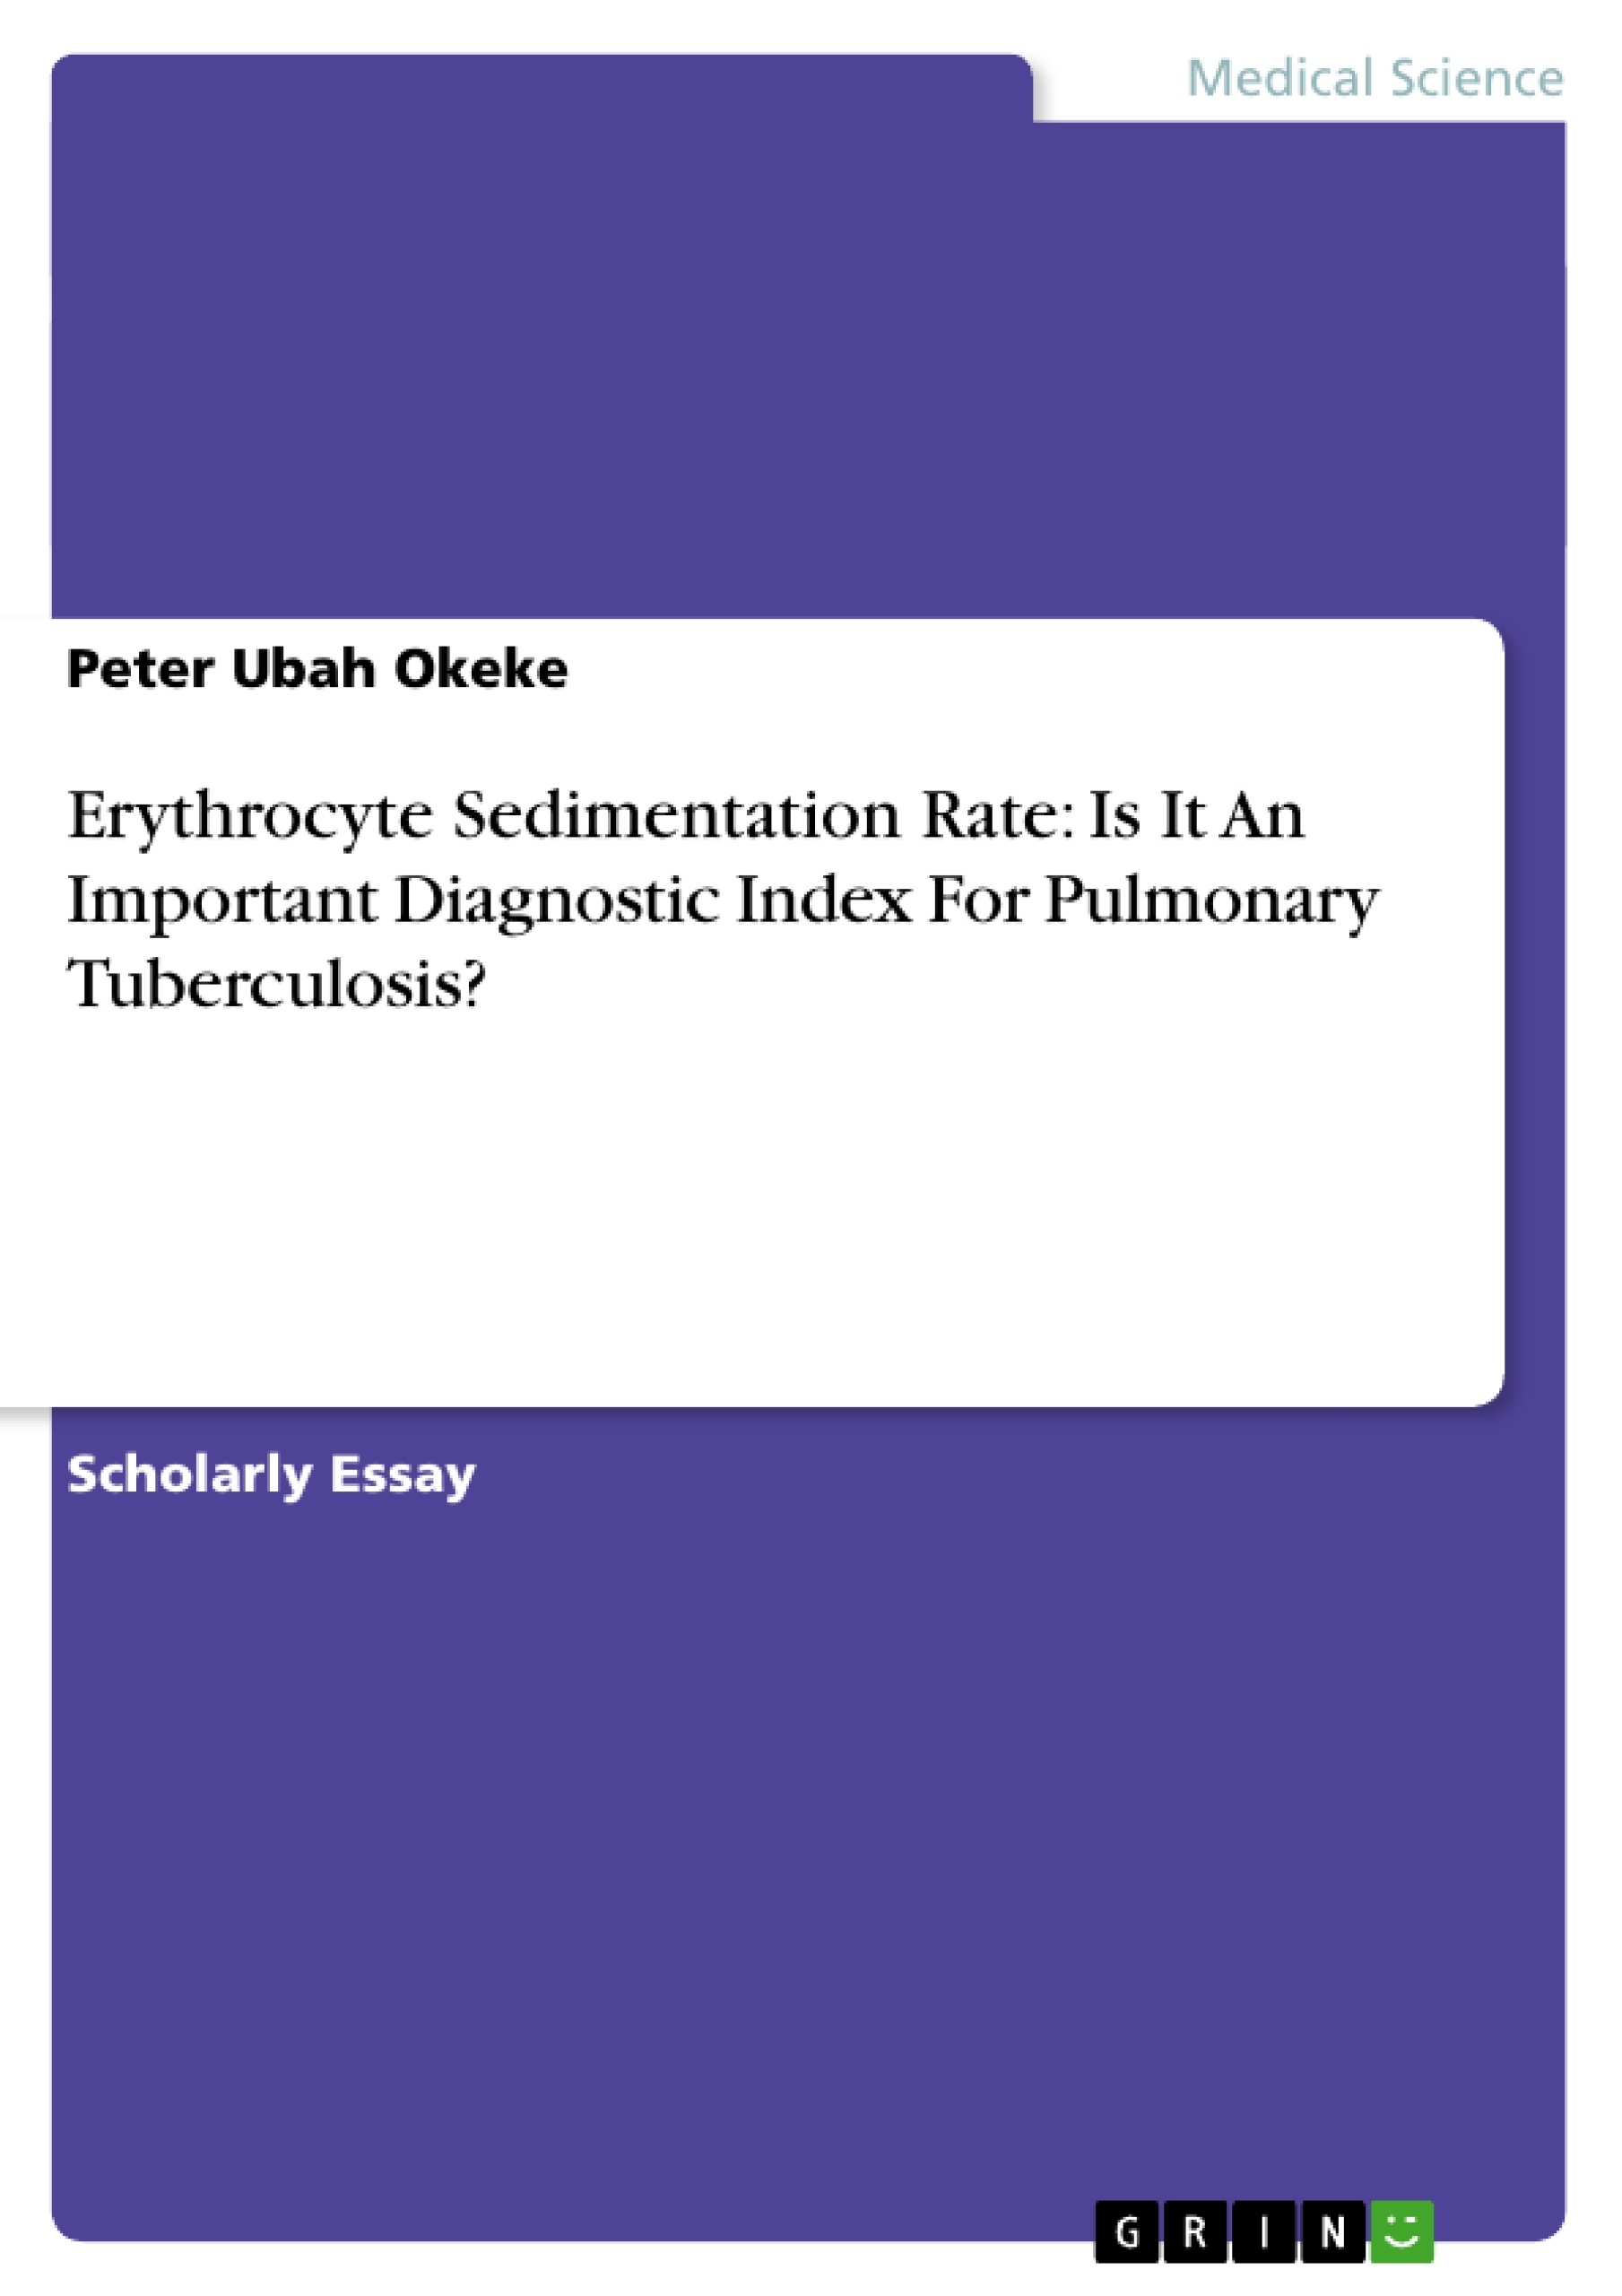 Titre: Erythrocyte Sedimentation Rate: Is It An Important Diagnostic Index For Pulmonary Tuberculosis?